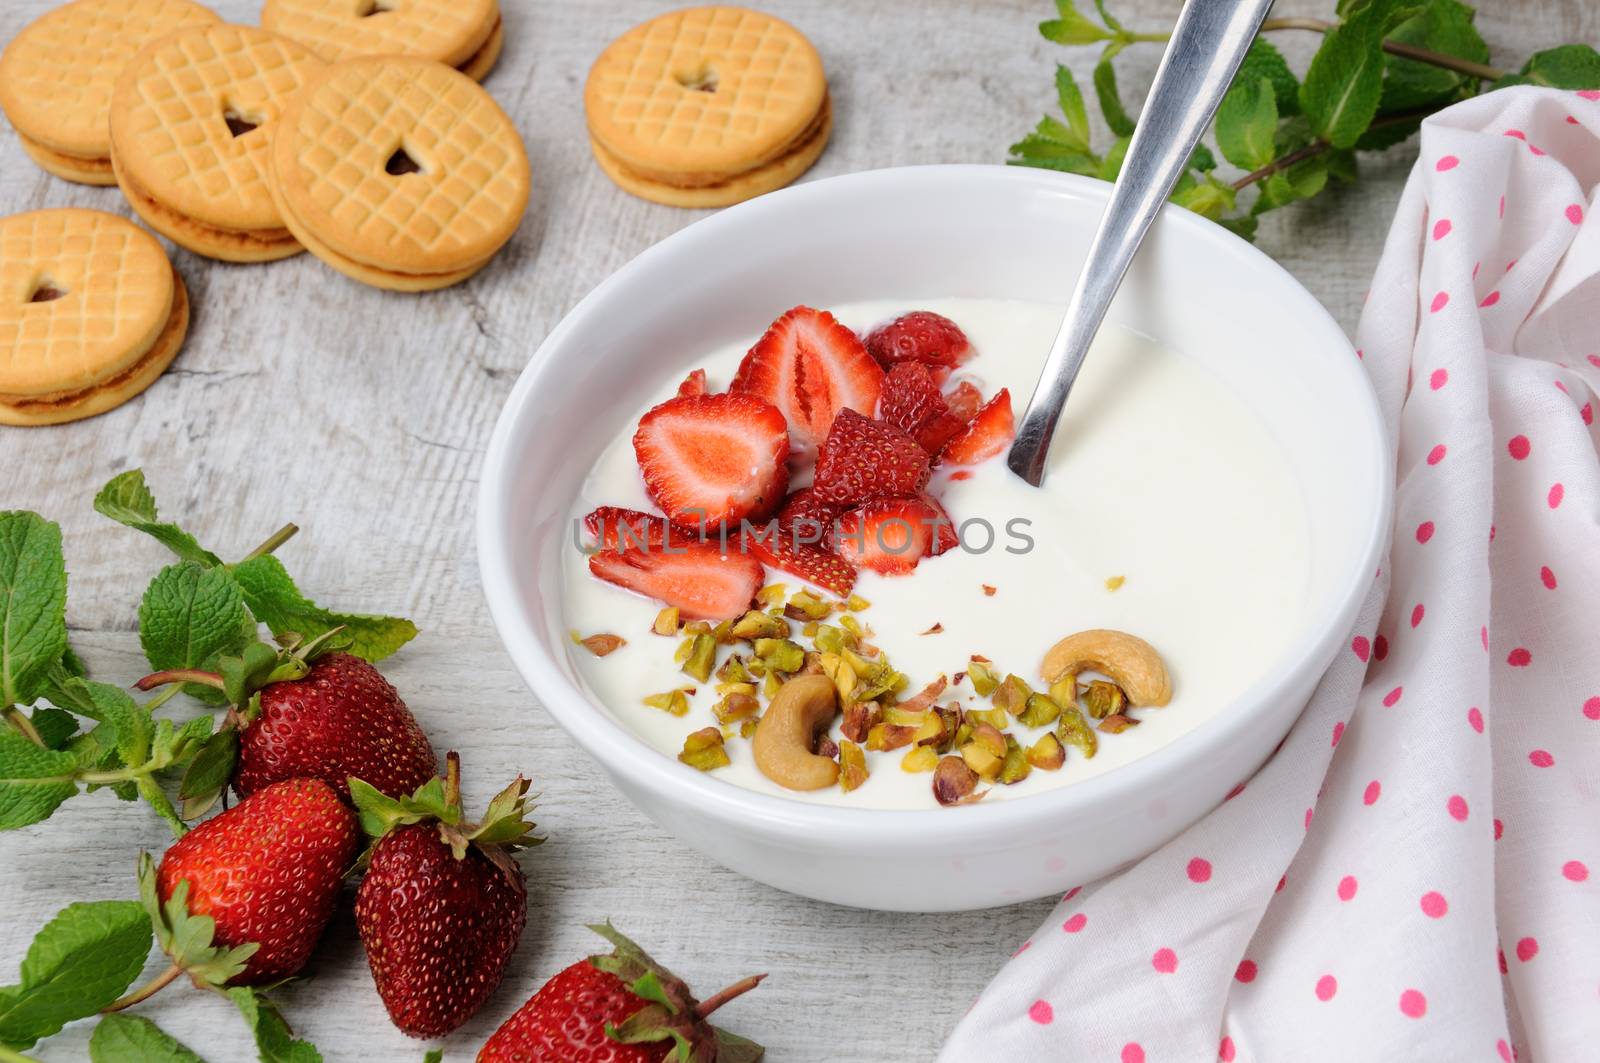 Chilled Buttermilk soup from Greek yogurt with strawberries and pistachios, cashews. Serve with crispy biscuits. Vertical shot.